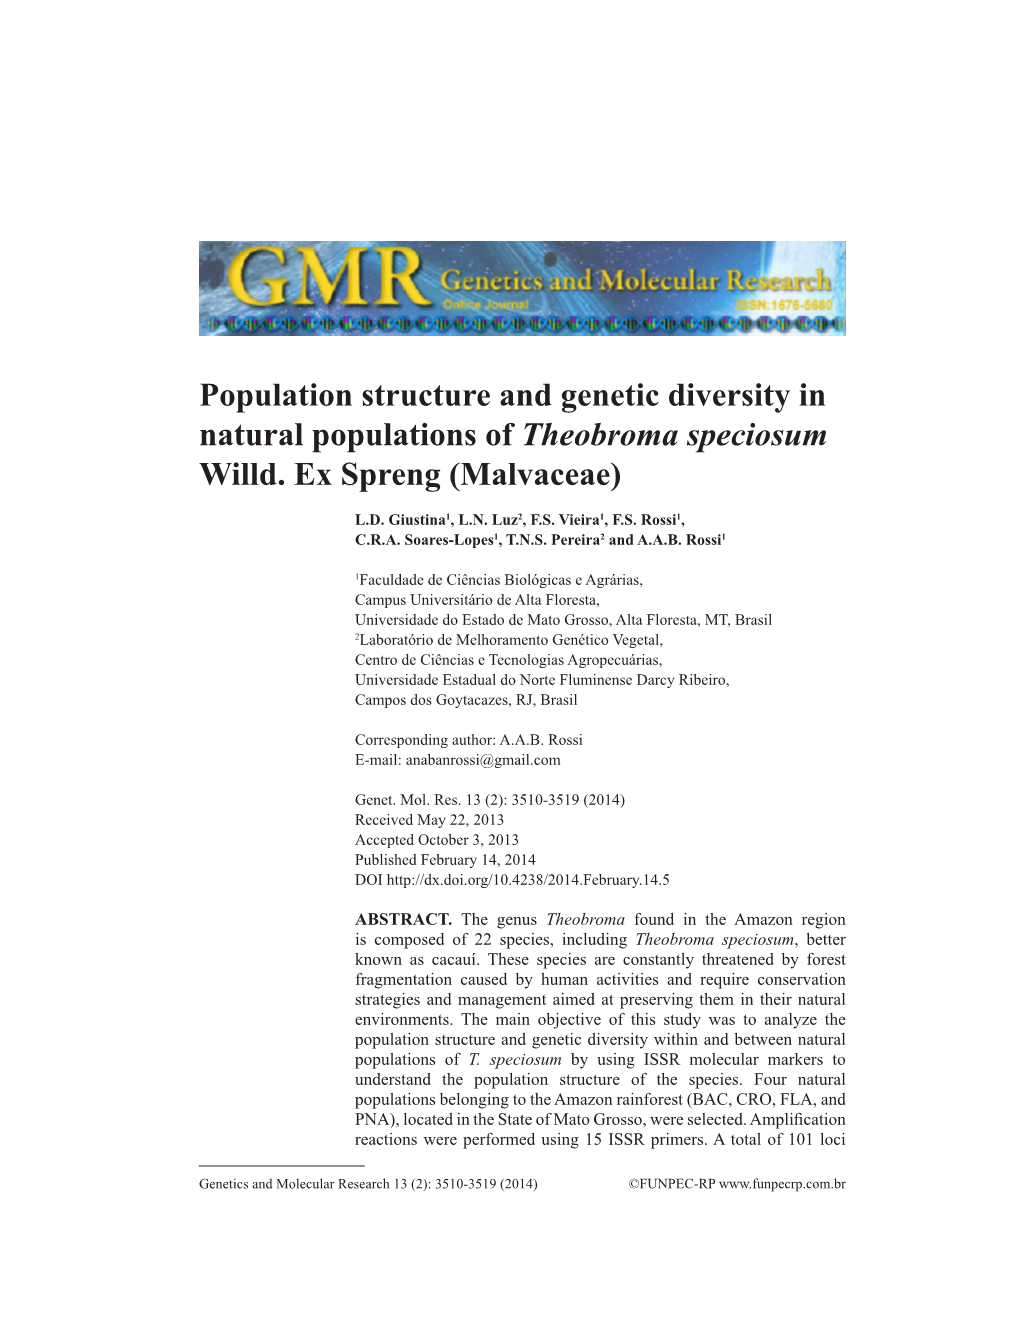 Population Structure and Genetic Diversity in Natural Populations of Theobroma Speciosum Willd